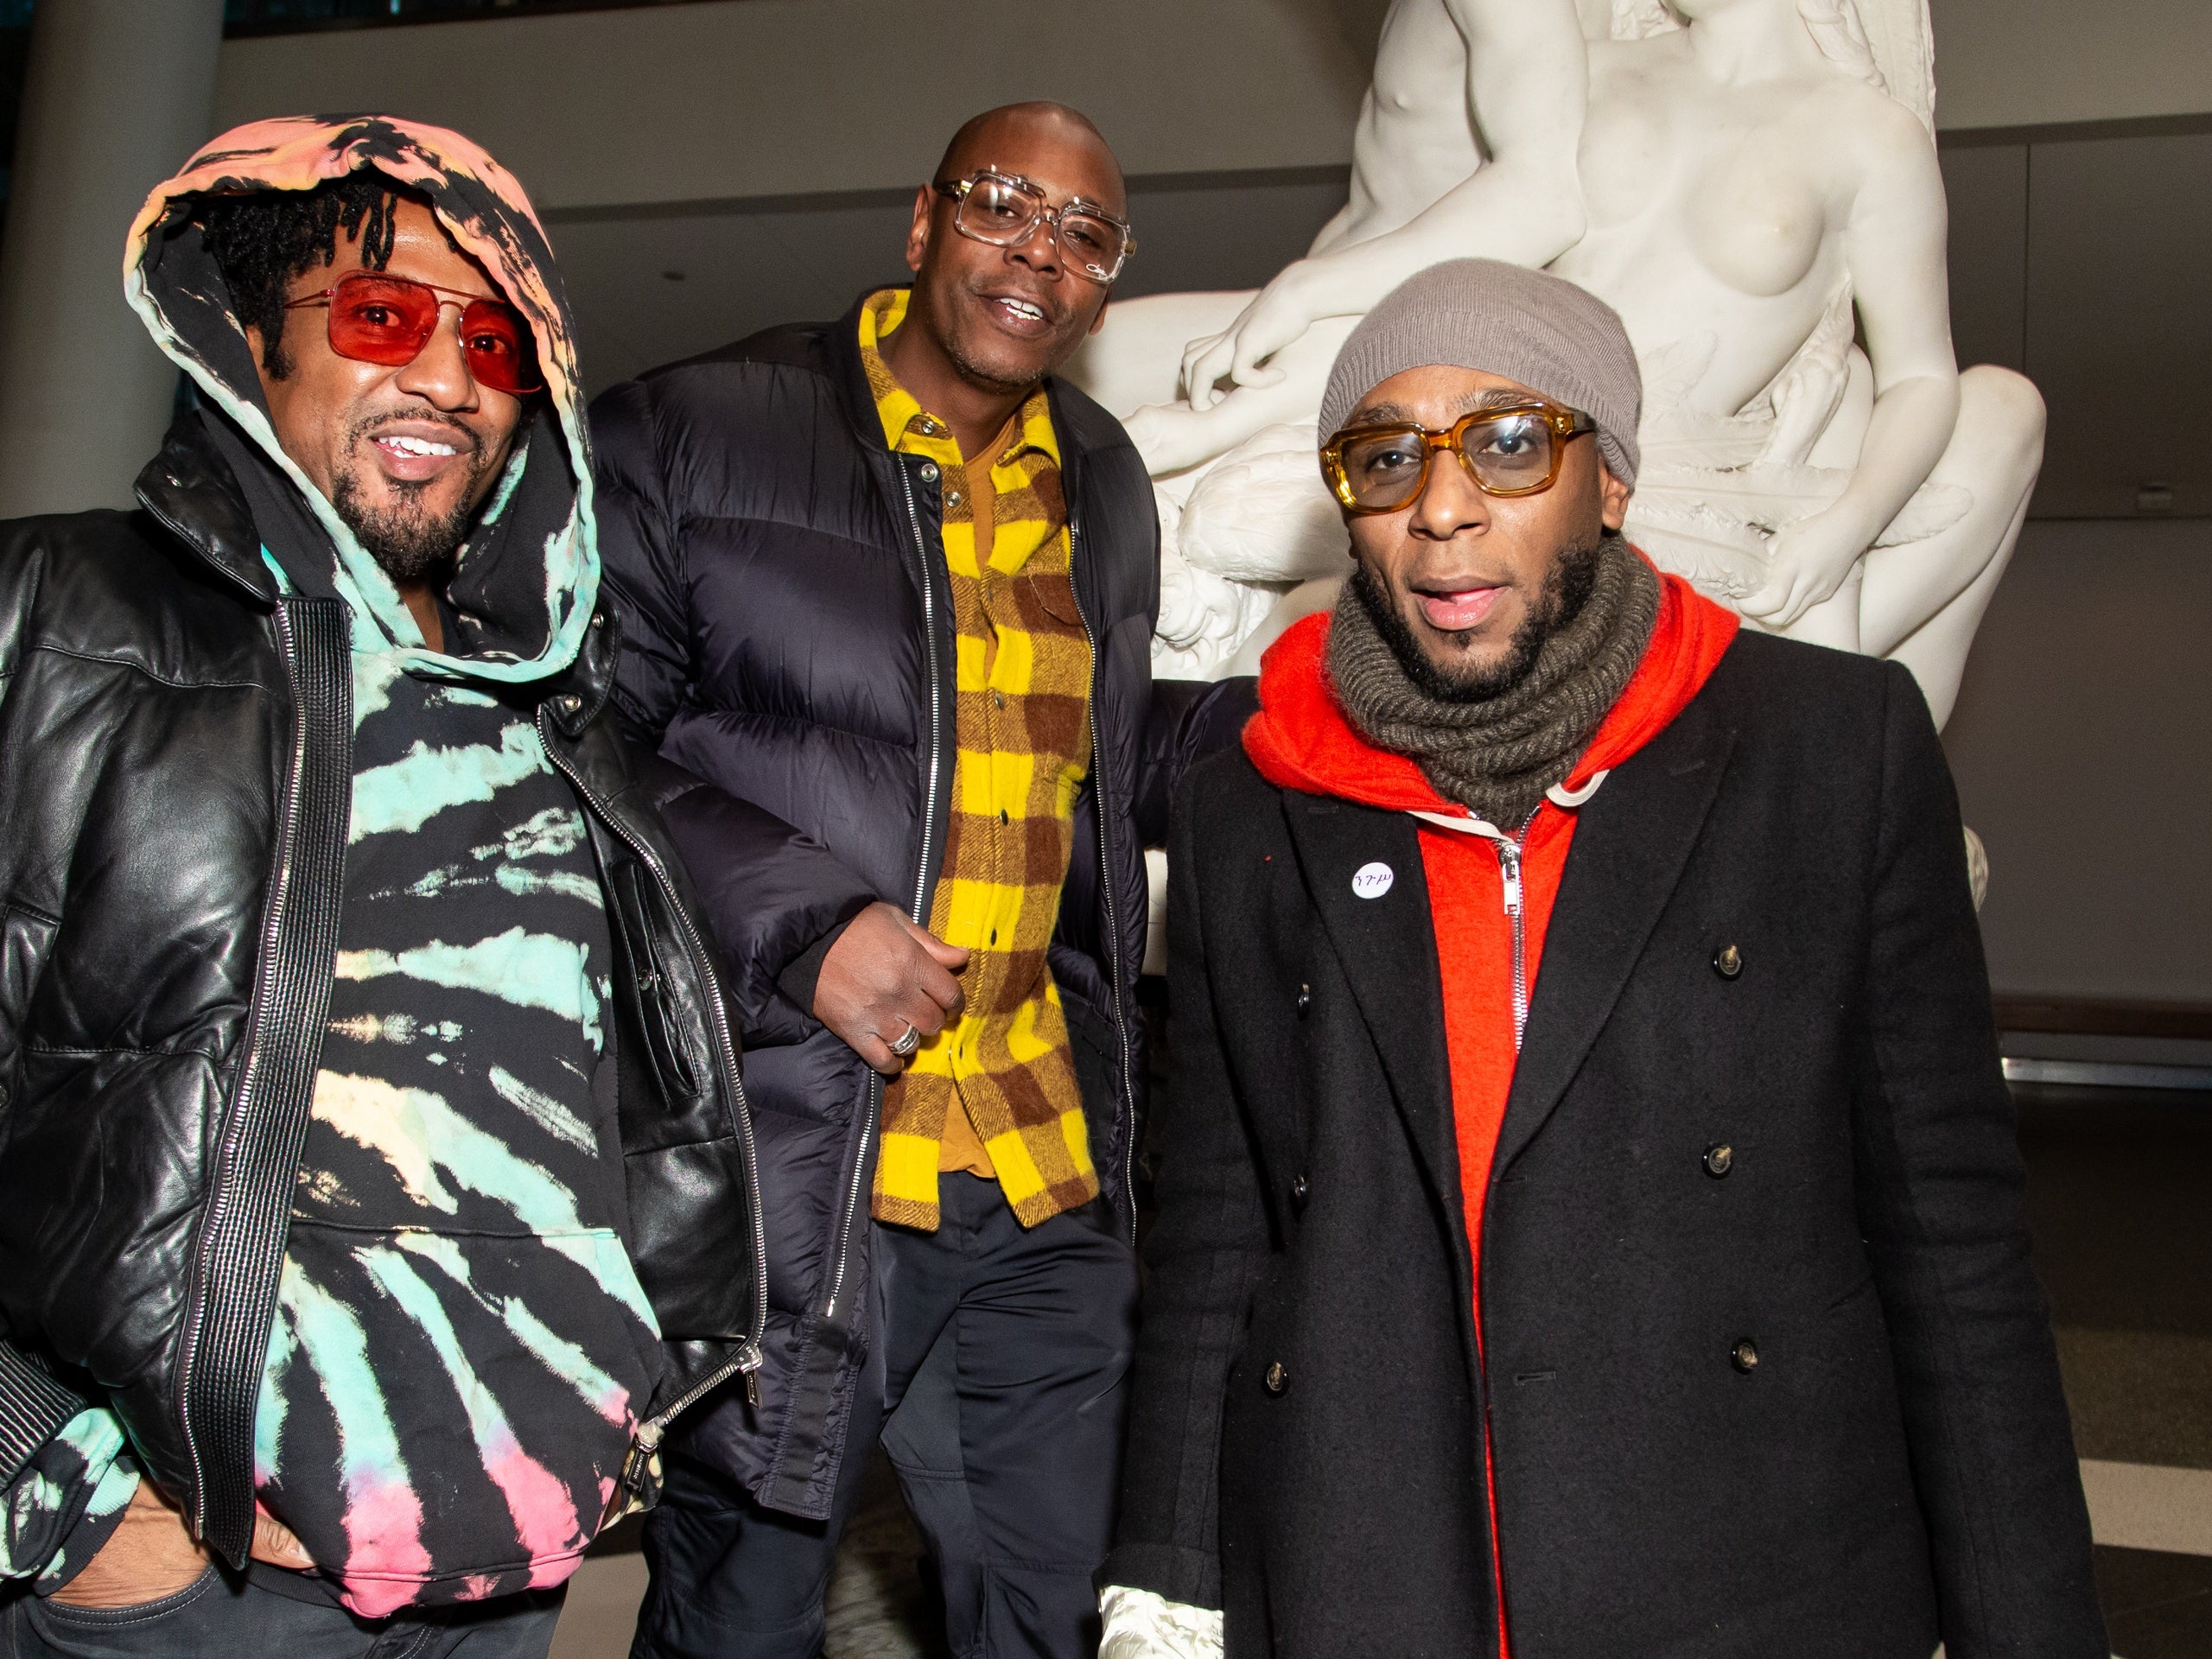 Dave Chappelle, Q-Tip & Brooklyn Show Out for Yasiin Bey’s ‘Negus’ Premiere